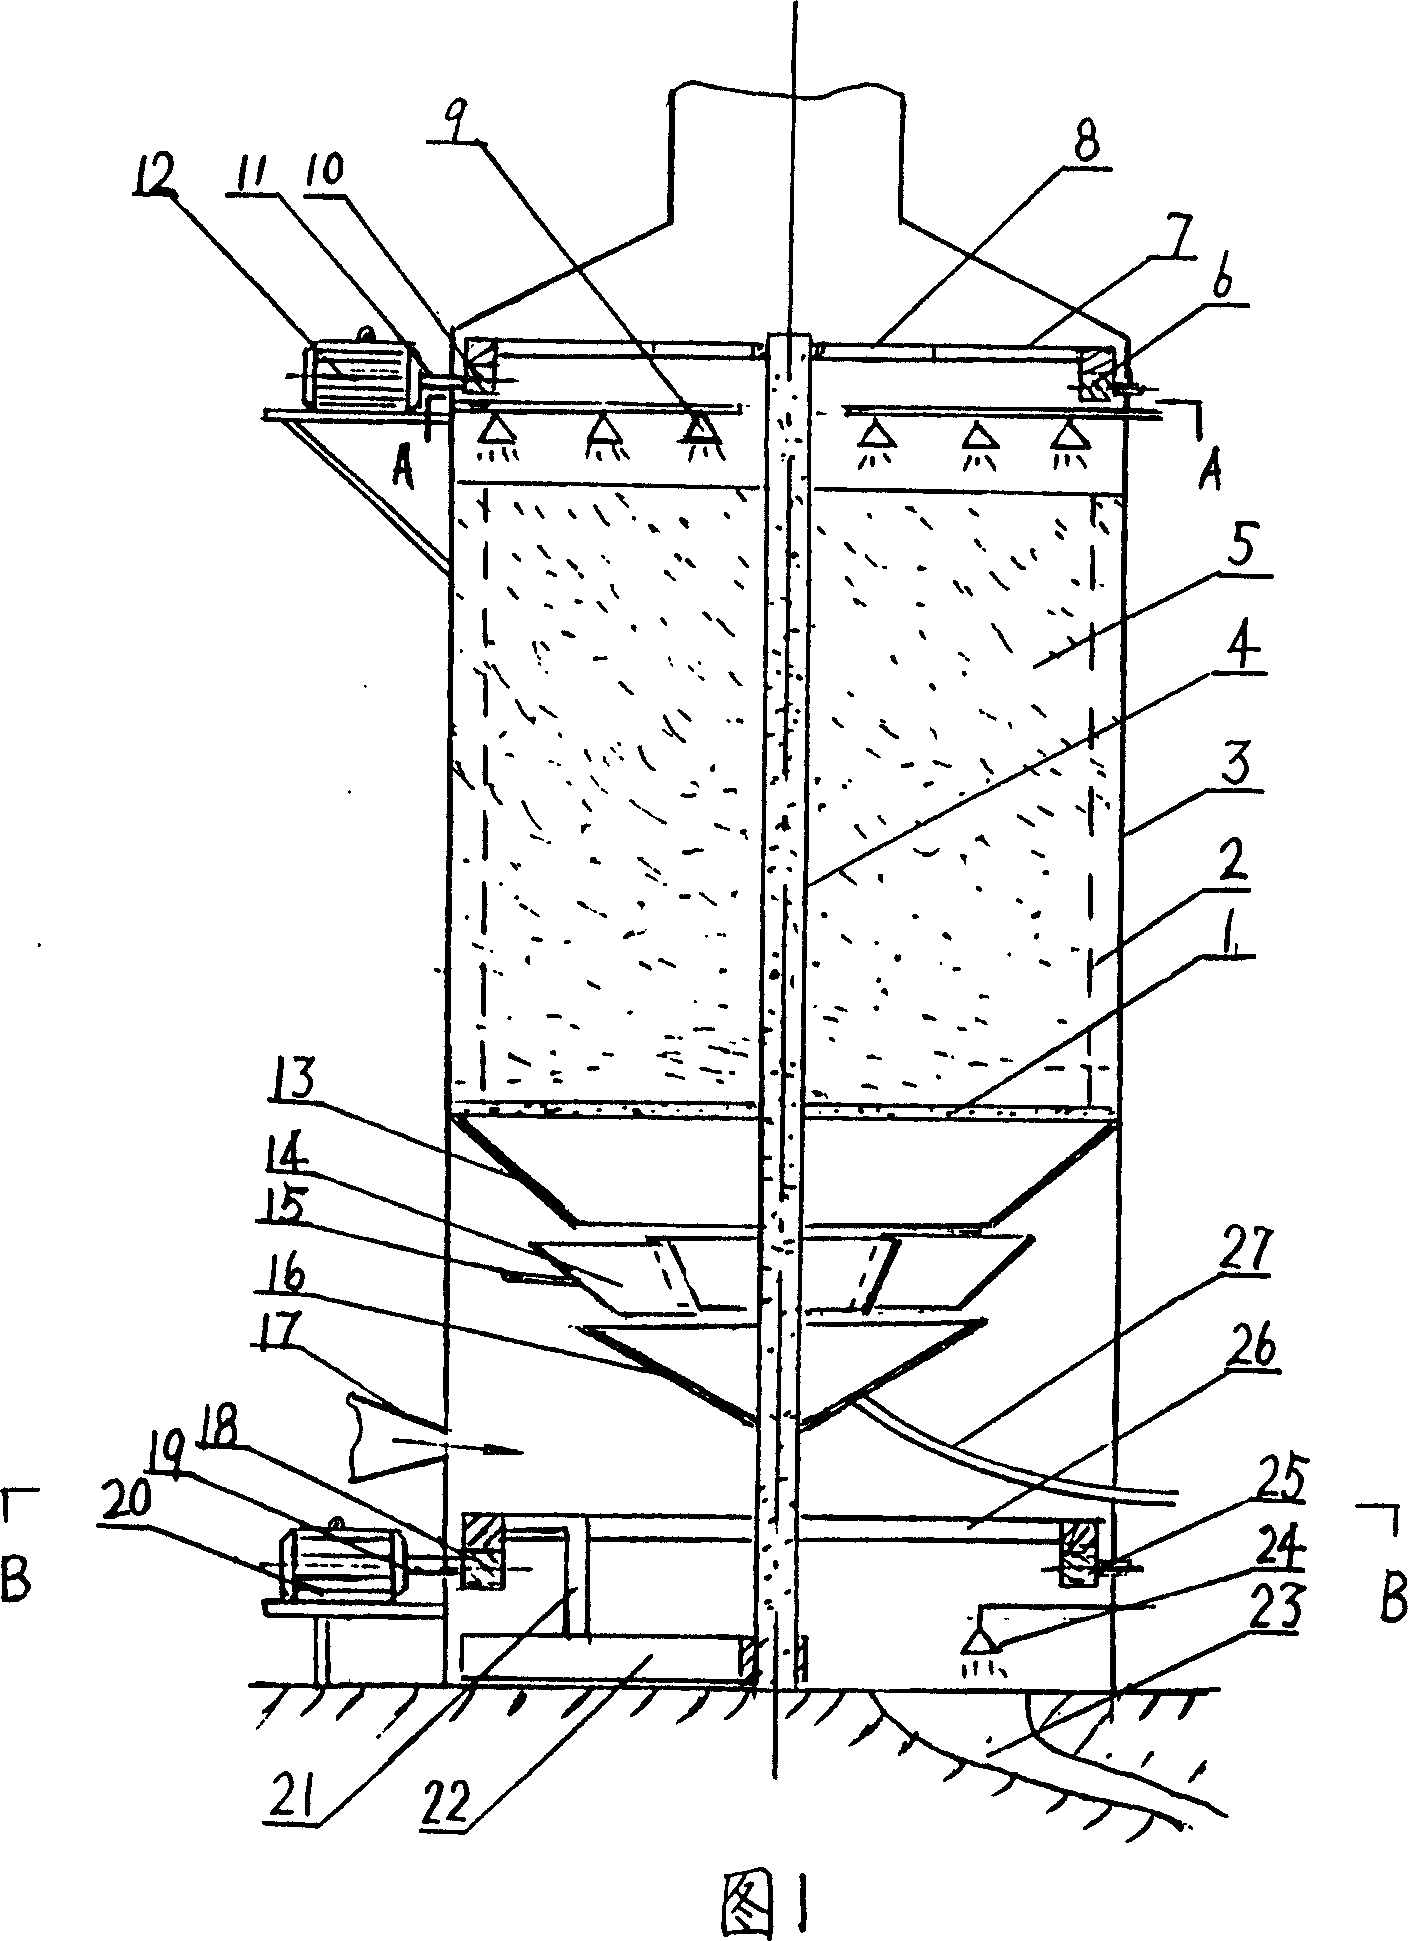 Active carbon flue gas desulfurizing reverse synchronous work tower